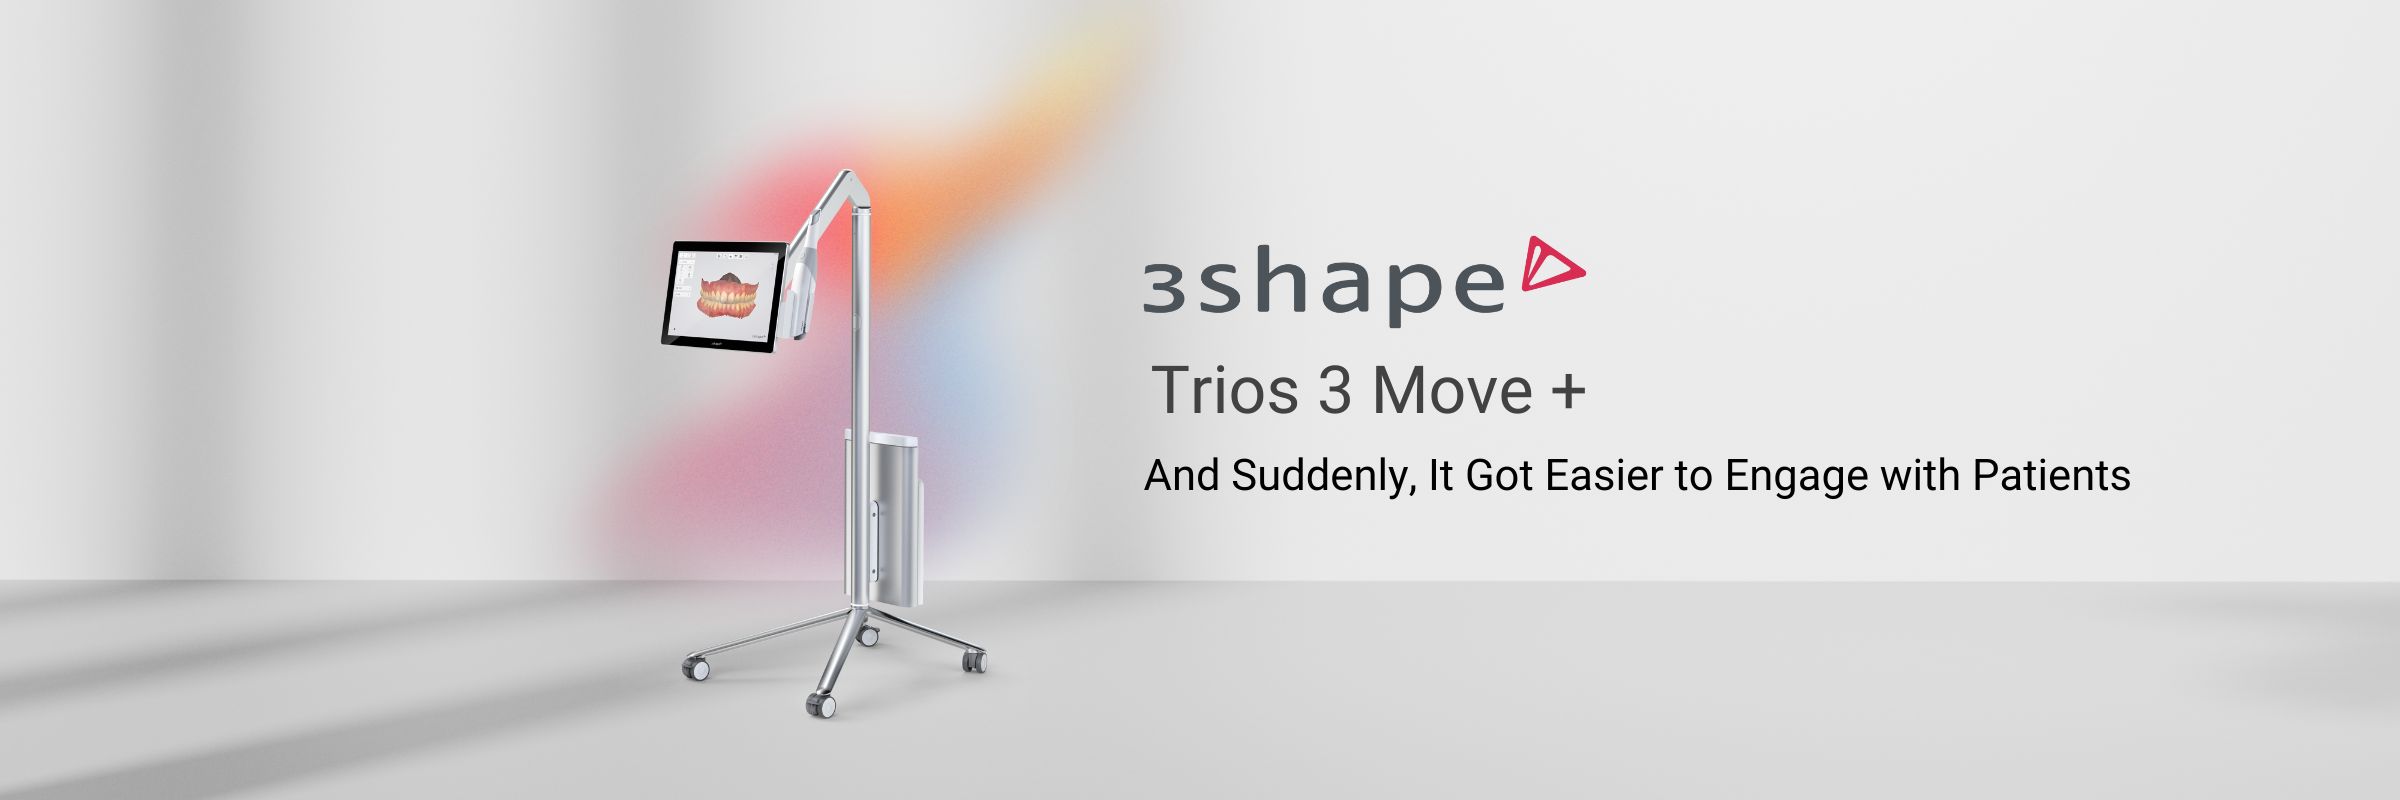 Trios Move Plus Intraoral Scanner Product Page Image